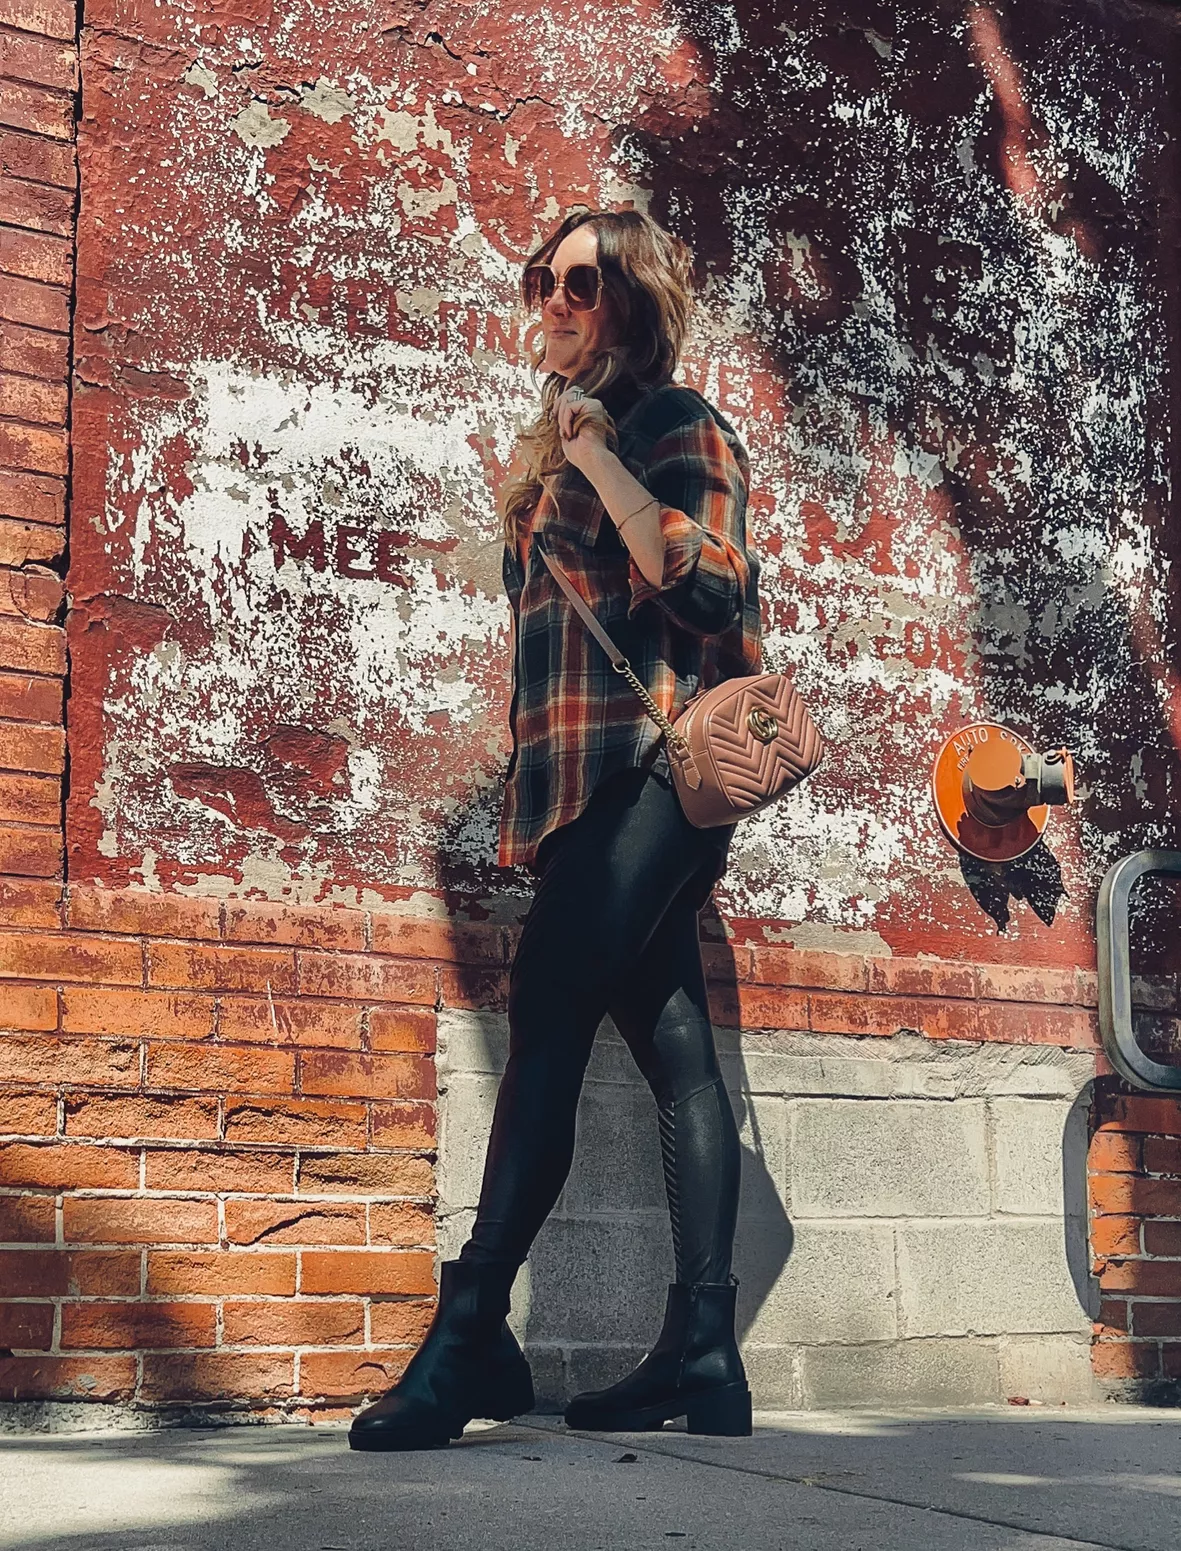 🍁 Embracing Fall in cozy chic style: Flannel, leggings, and